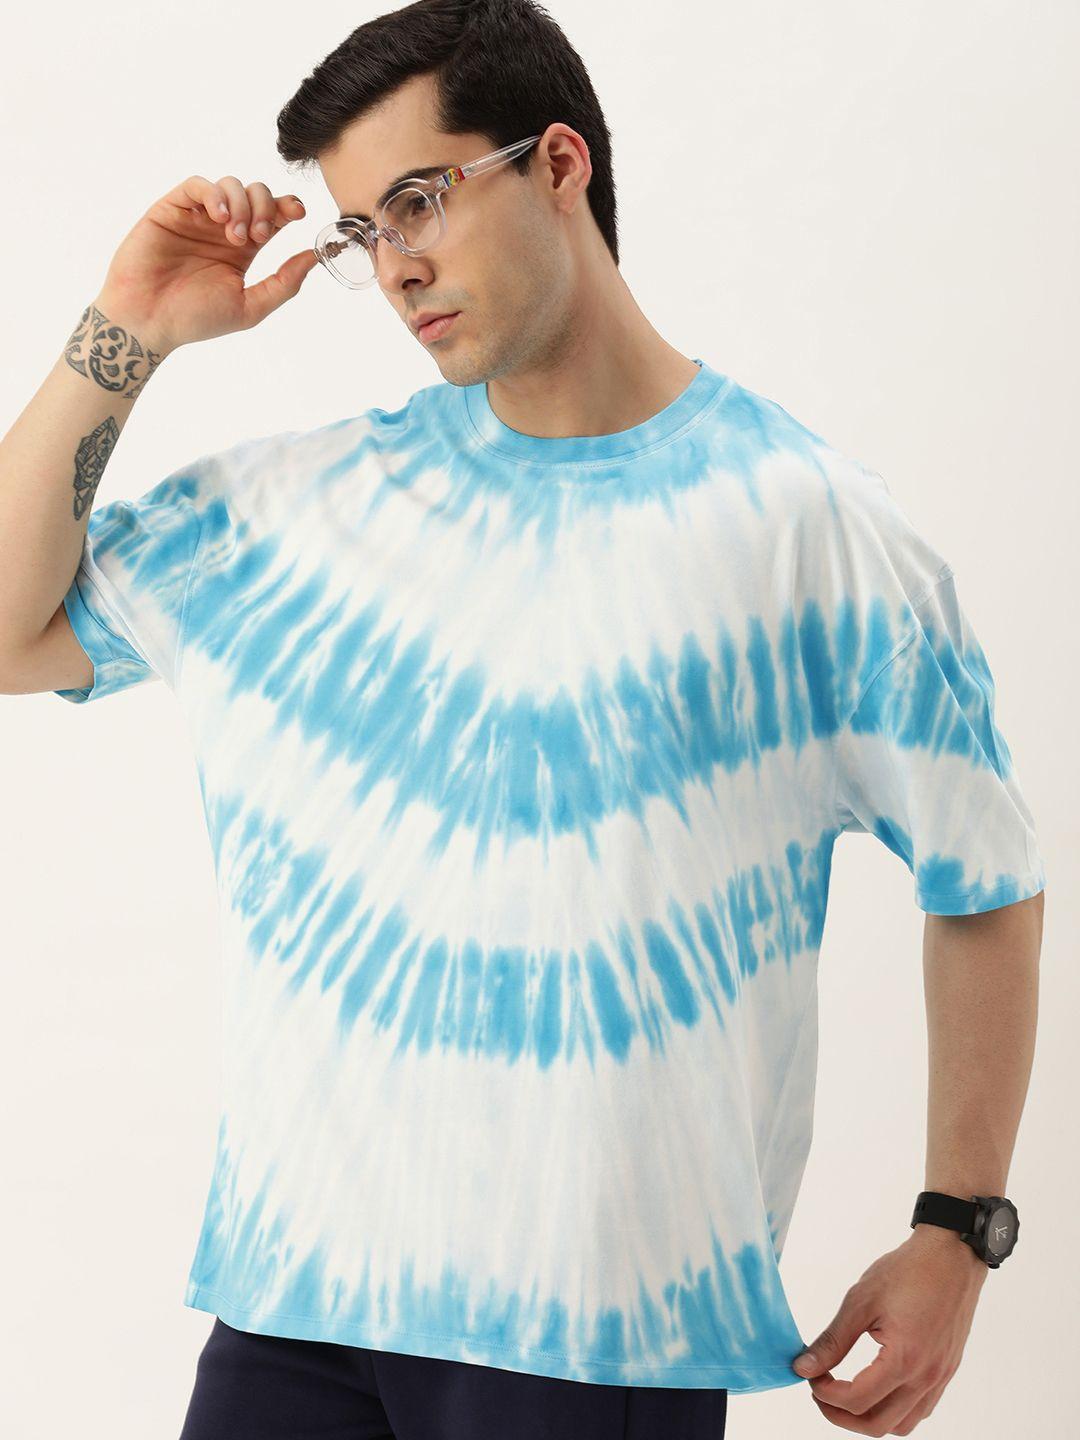 kook n keech tie and dye dyed pure cotton loose t-shirt